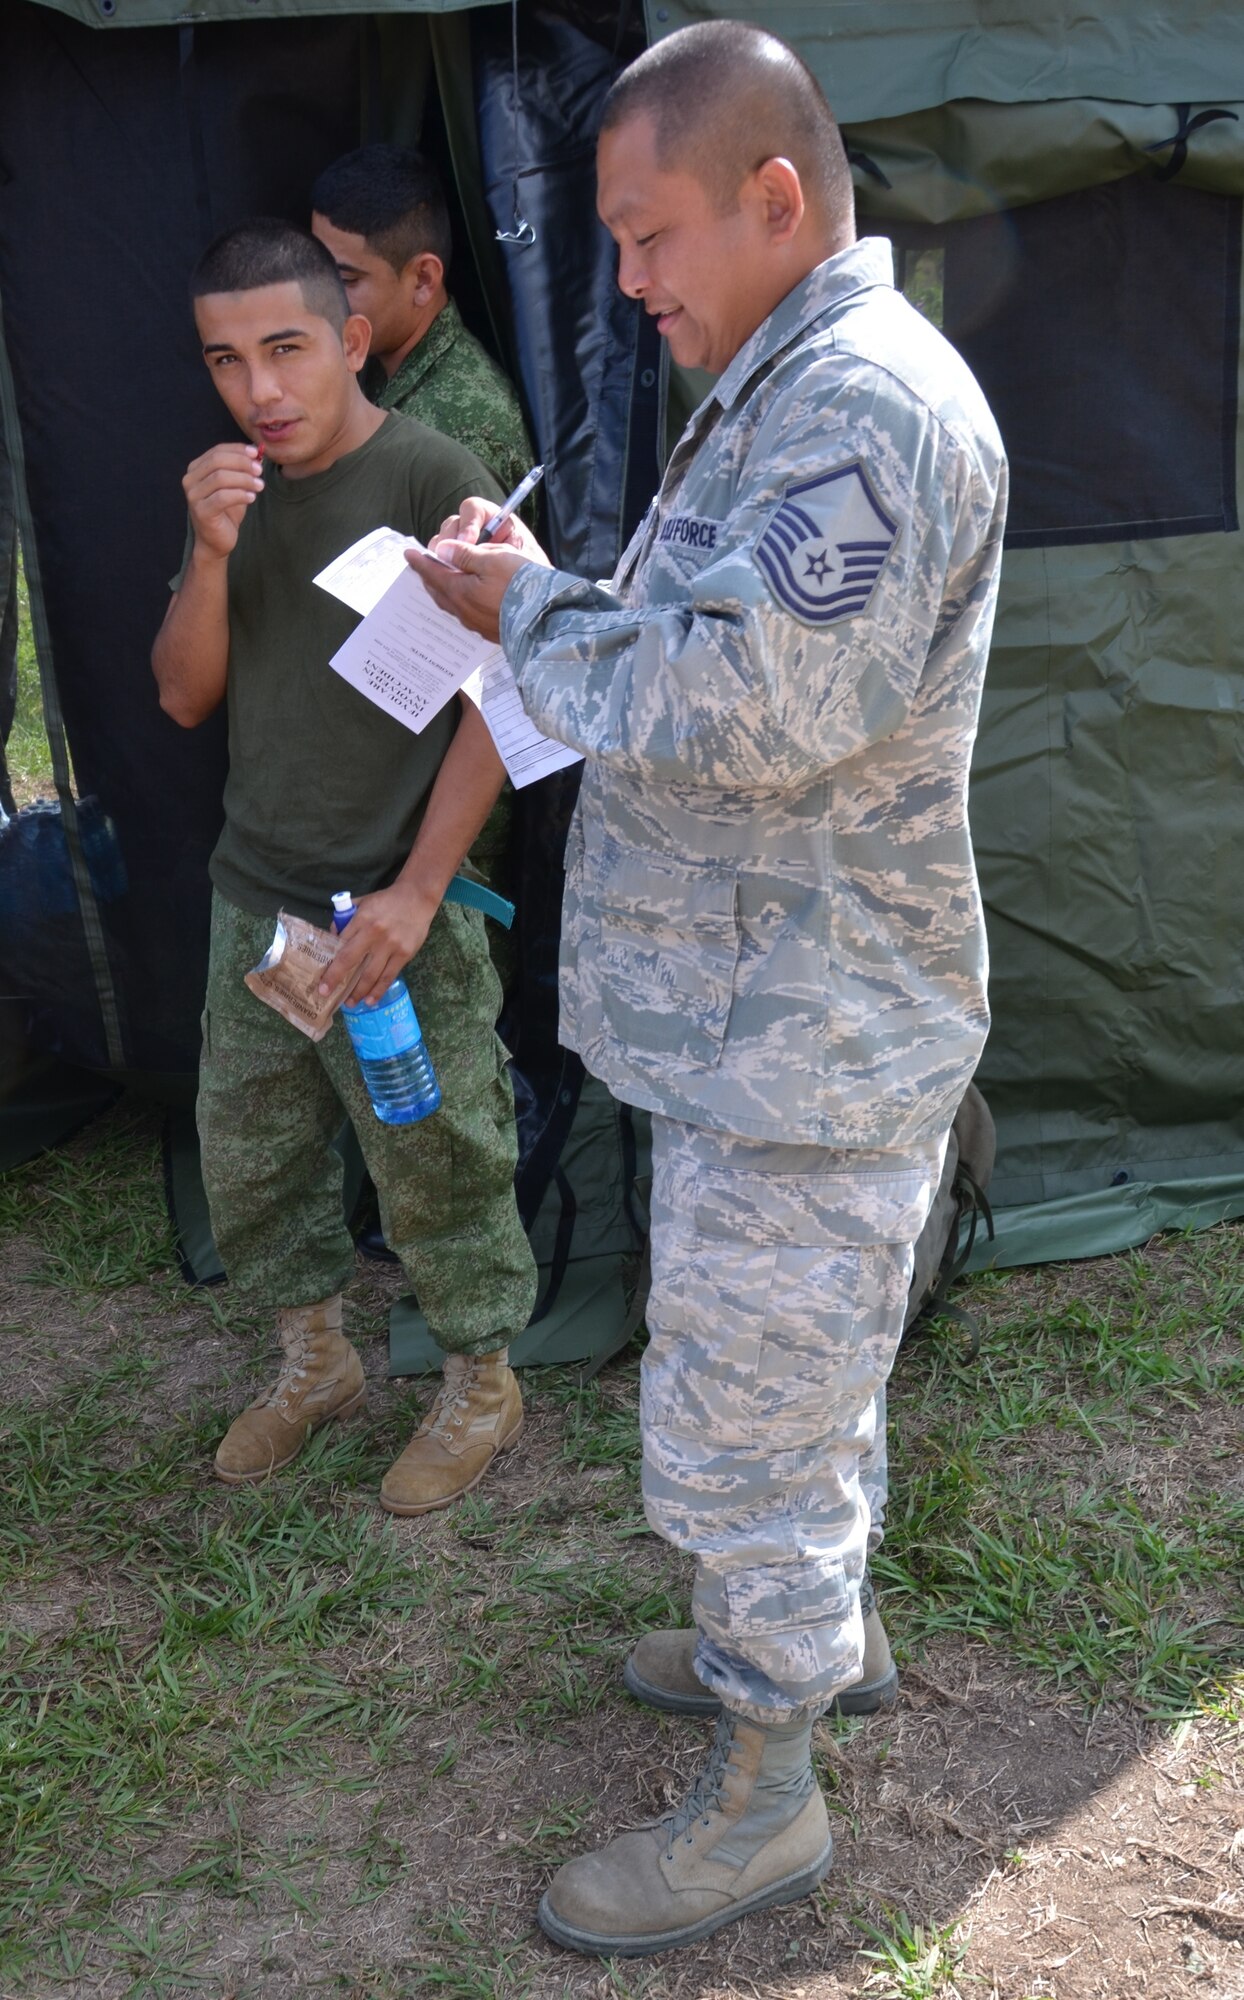 Master Sgt. Enrique Naranjo, New Horizons logistics superintendent, prepares a MRE hand receipt for the Belize Defence Force soldiers securing New Horizons equipment at the Belmopan Hospital construction site, March 11. During the past 20 years, U.S. Southern Command has worked side-by-side with the Belize Defence Force as well as the Ministries of Health and Education to conduct combined exercises to strengthen each participant's response to humanitarian relief scenarios. (USAF photo by Master Sgt. Kelly Ogden/Released)